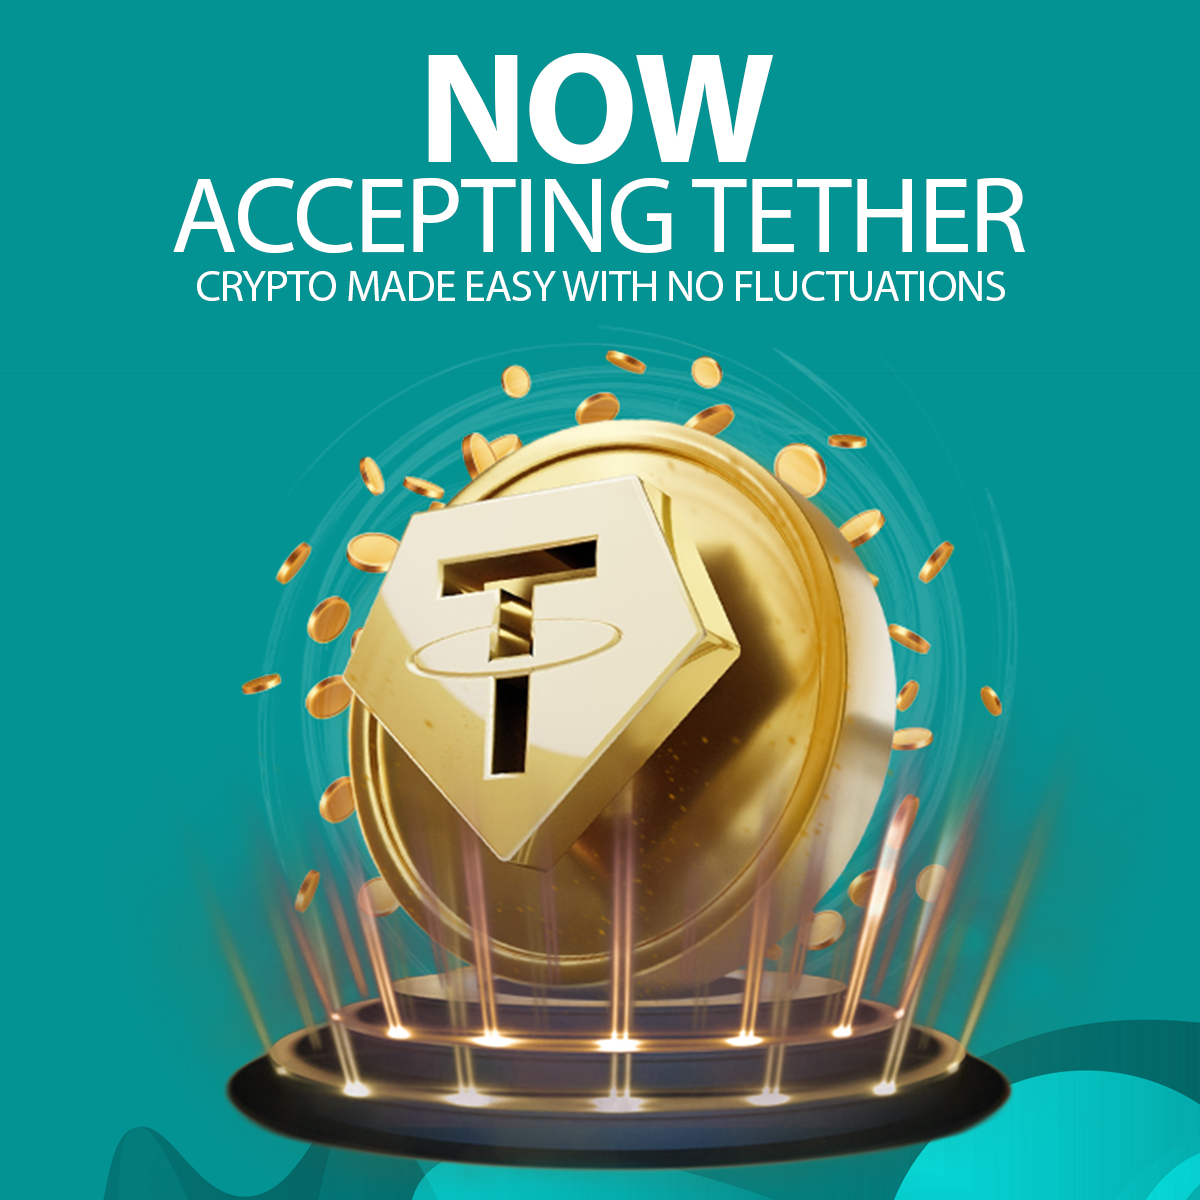 Slots.lv now accepts cryptocurrency Tether